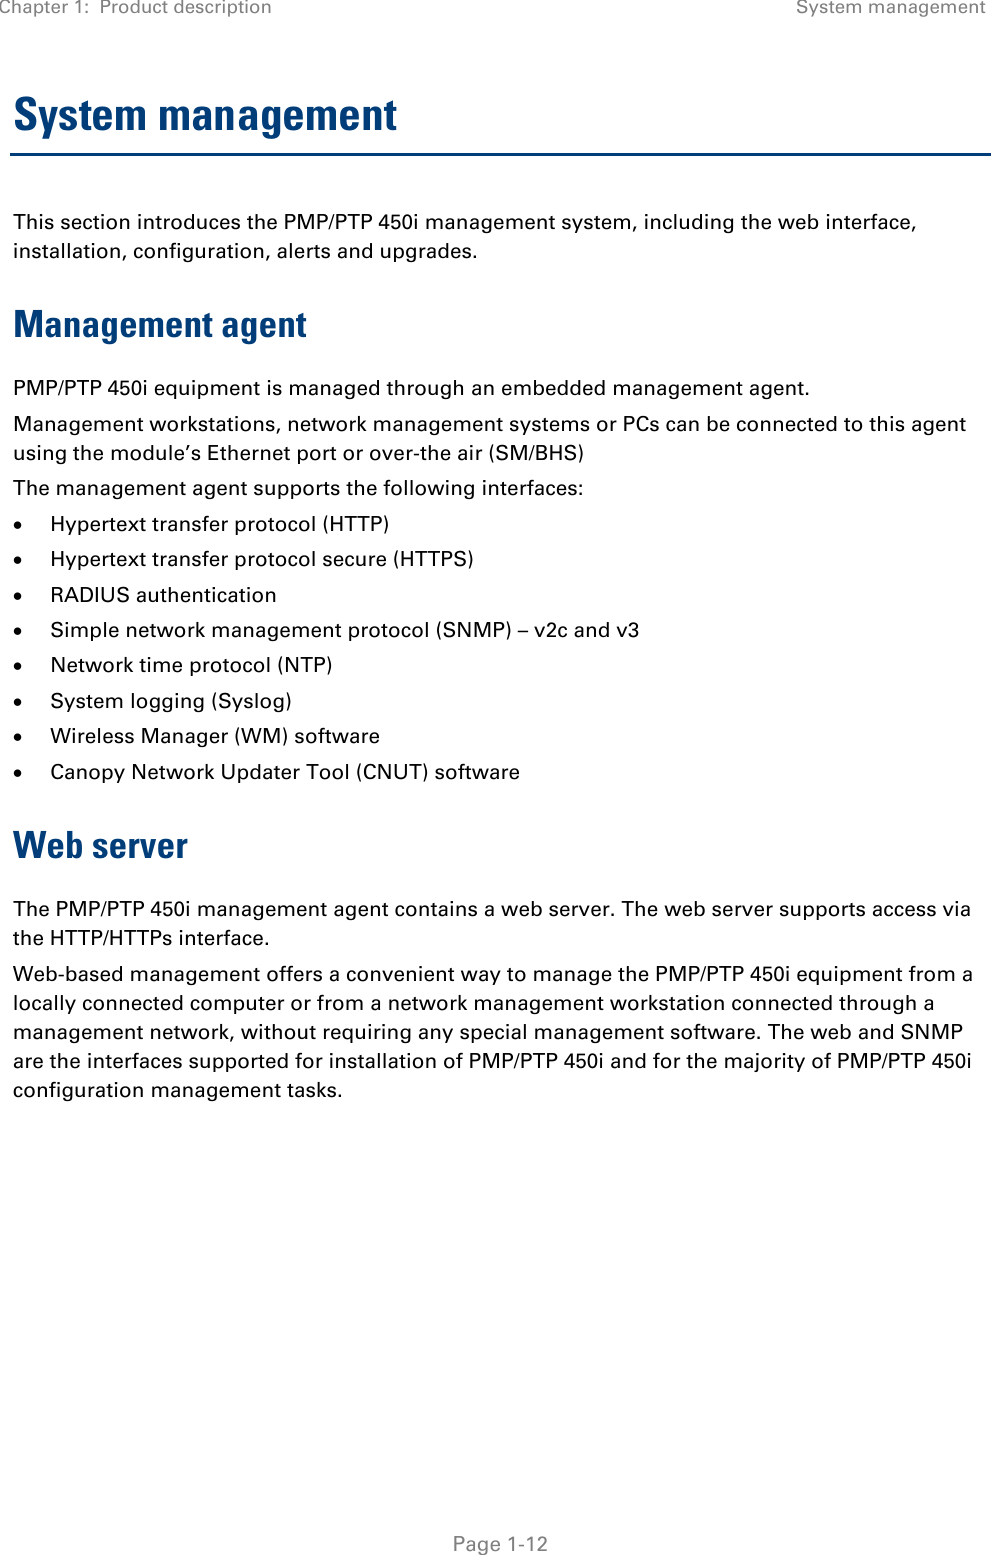 Chapter 1:  Product description System management   Page 1-12 System management This section introduces the PMP/PTP 450i management system, including the web interface, installation, configuration, alerts and upgrades. Management agent PMP/PTP 450i equipment is managed through an embedded management agent.  Management workstations, network management systems or PCs can be connected to this agent using the module’s Ethernet port or over-the air (SM/BHS)  The management agent supports the following interfaces:  • Hypertext transfer protocol (HTTP)  • Hypertext transfer protocol secure (HTTPS) • RADIUS authentication  • Simple network management protocol (SNMP) – v2c and v3 • Network time protocol (NTP)  • System logging (Syslog)  • Wireless Manager (WM) software  • Canopy Network Updater Tool (CNUT) software  Web server The PMP/PTP 450i management agent contains a web server. The web server supports access via the HTTP/HTTPs interface. Web-based management offers a convenient way to manage the PMP/PTP 450i equipment from a locally connected computer or from a network management workstation connected through a management network, without requiring any special management software. The web and SNMP are the interfaces supported for installation of PMP/PTP 450i and for the majority of PMP/PTP 450i configuration management tasks.    